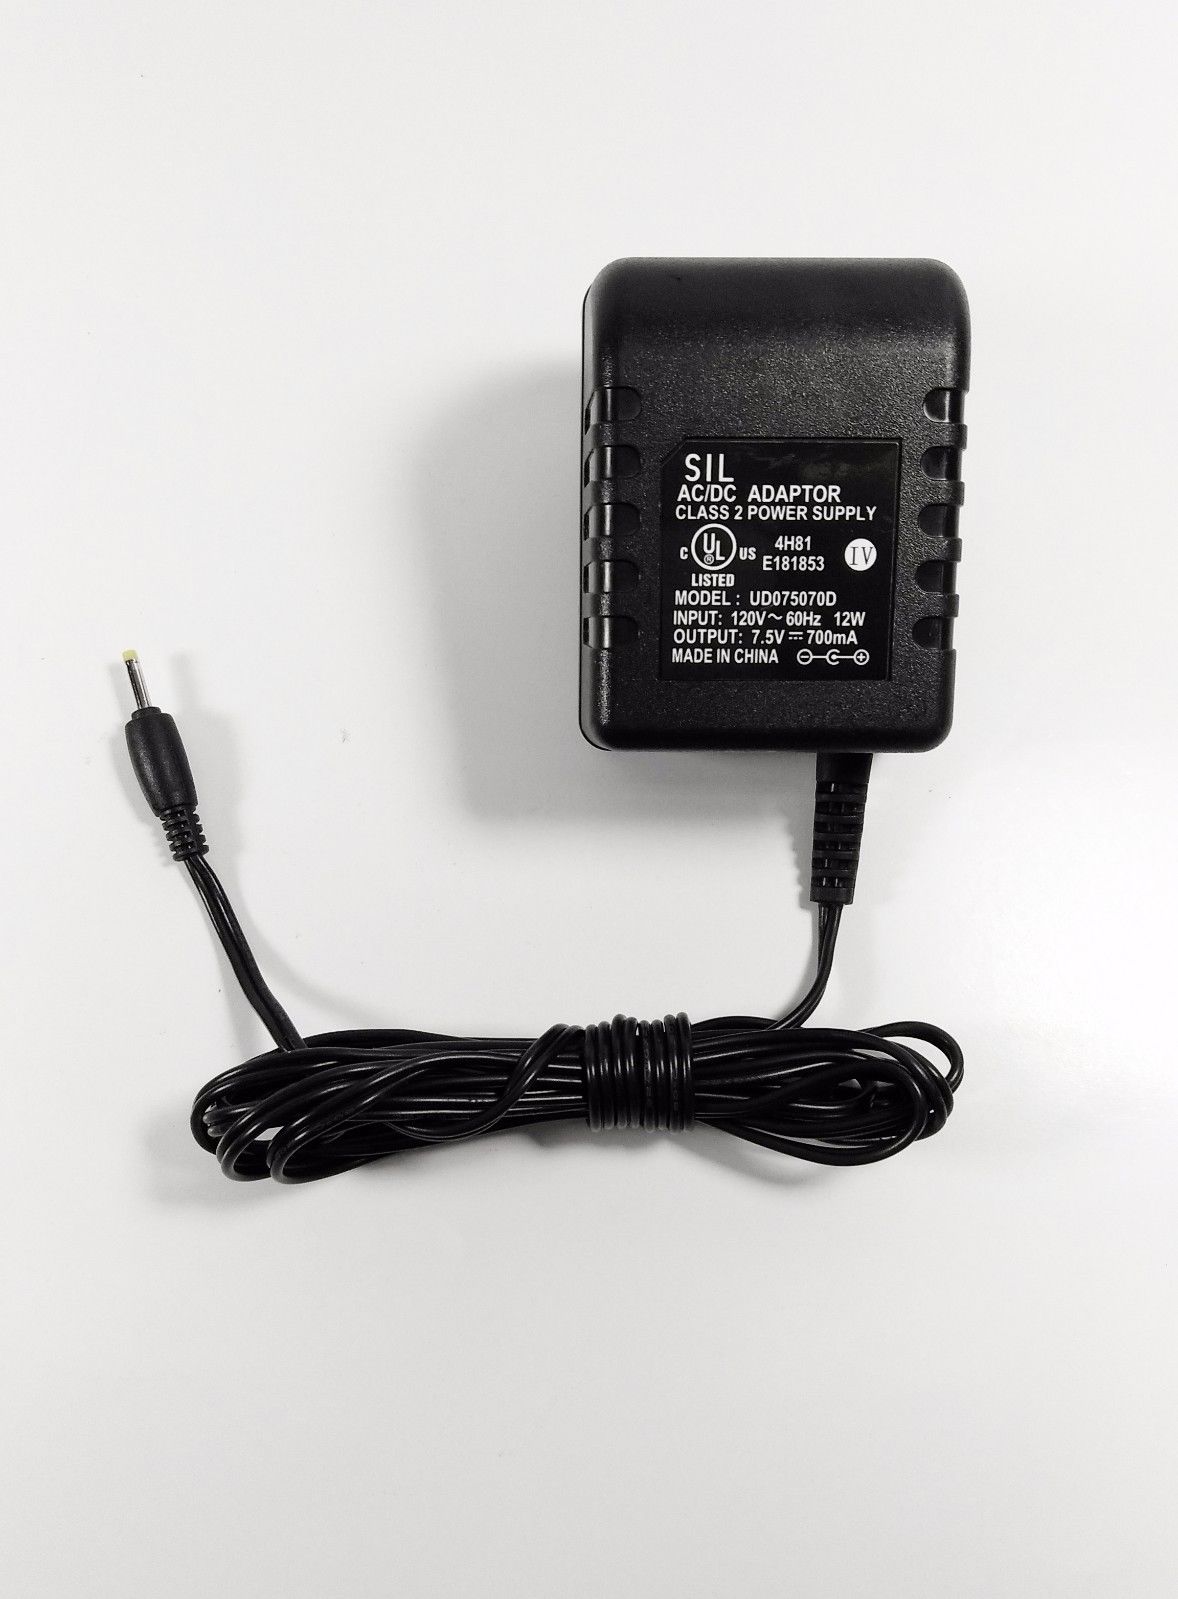 NEW 7.5V 700mA SIL UD075070D Class 2 Power Supply AC/DC Adapter